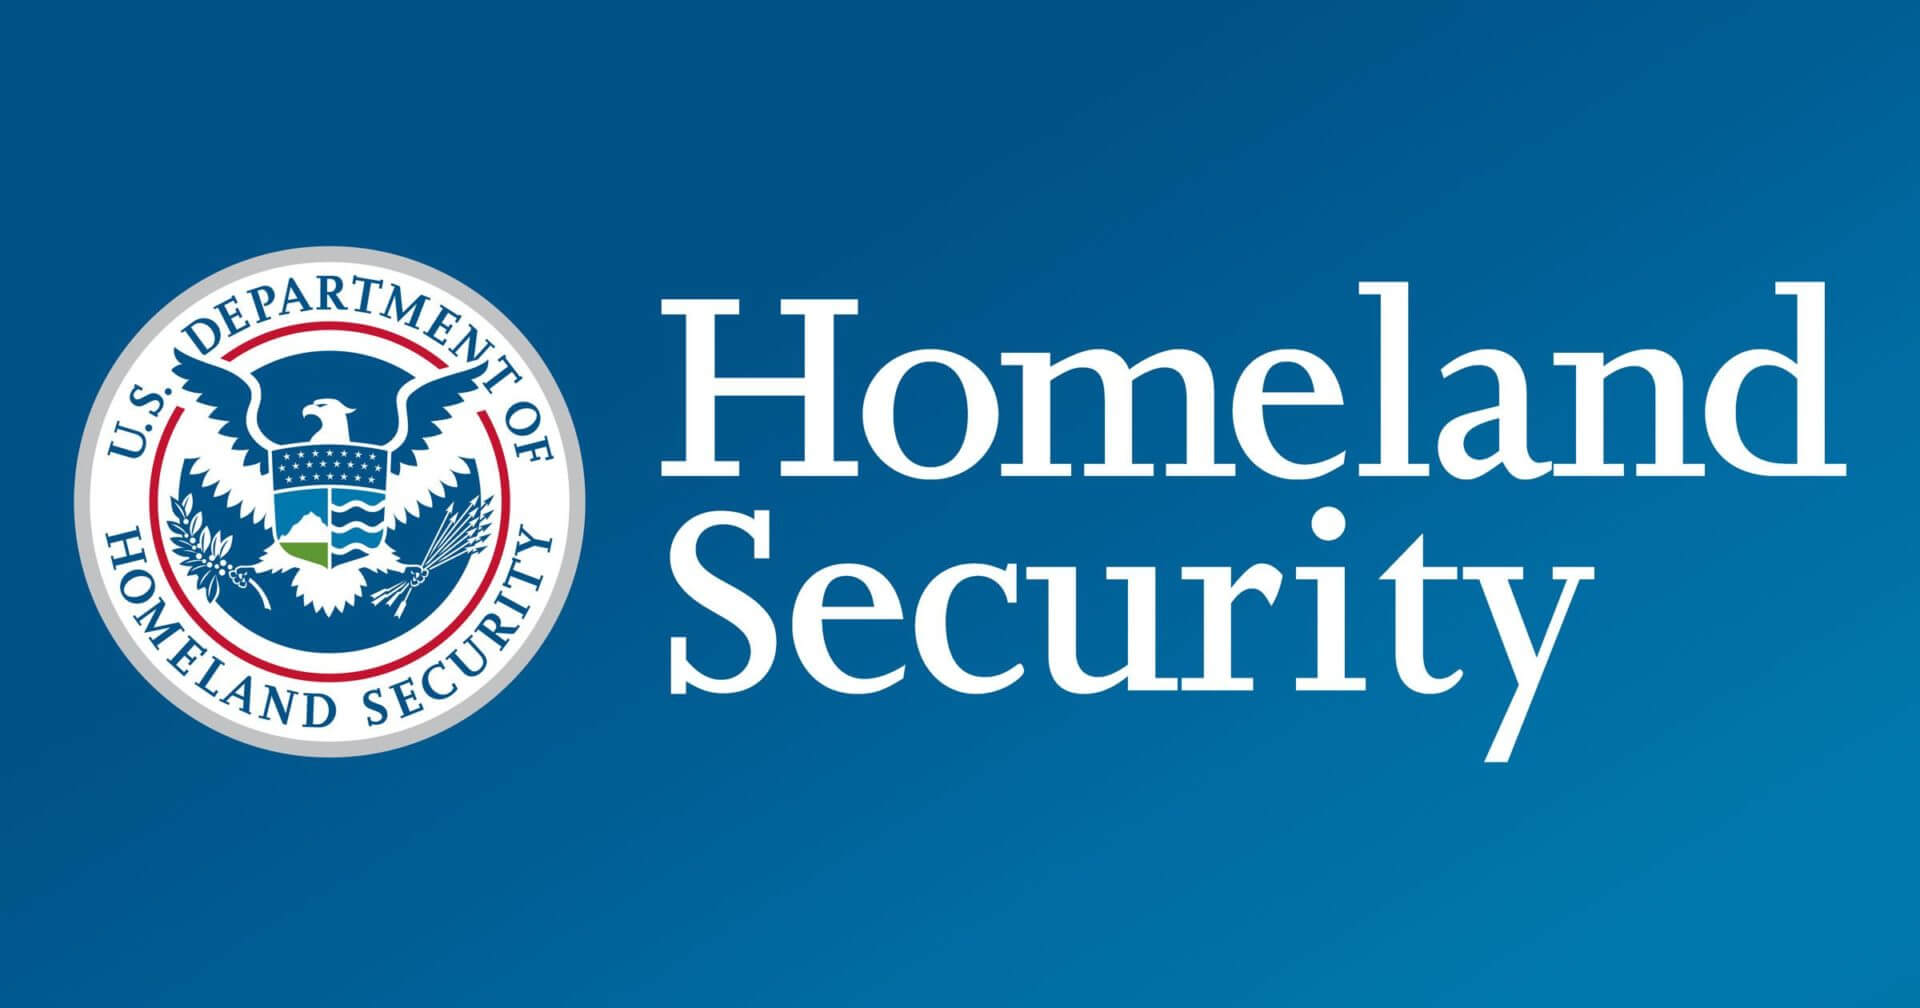 Featured image for “Department of Homeland Security Recruitment Webinars”